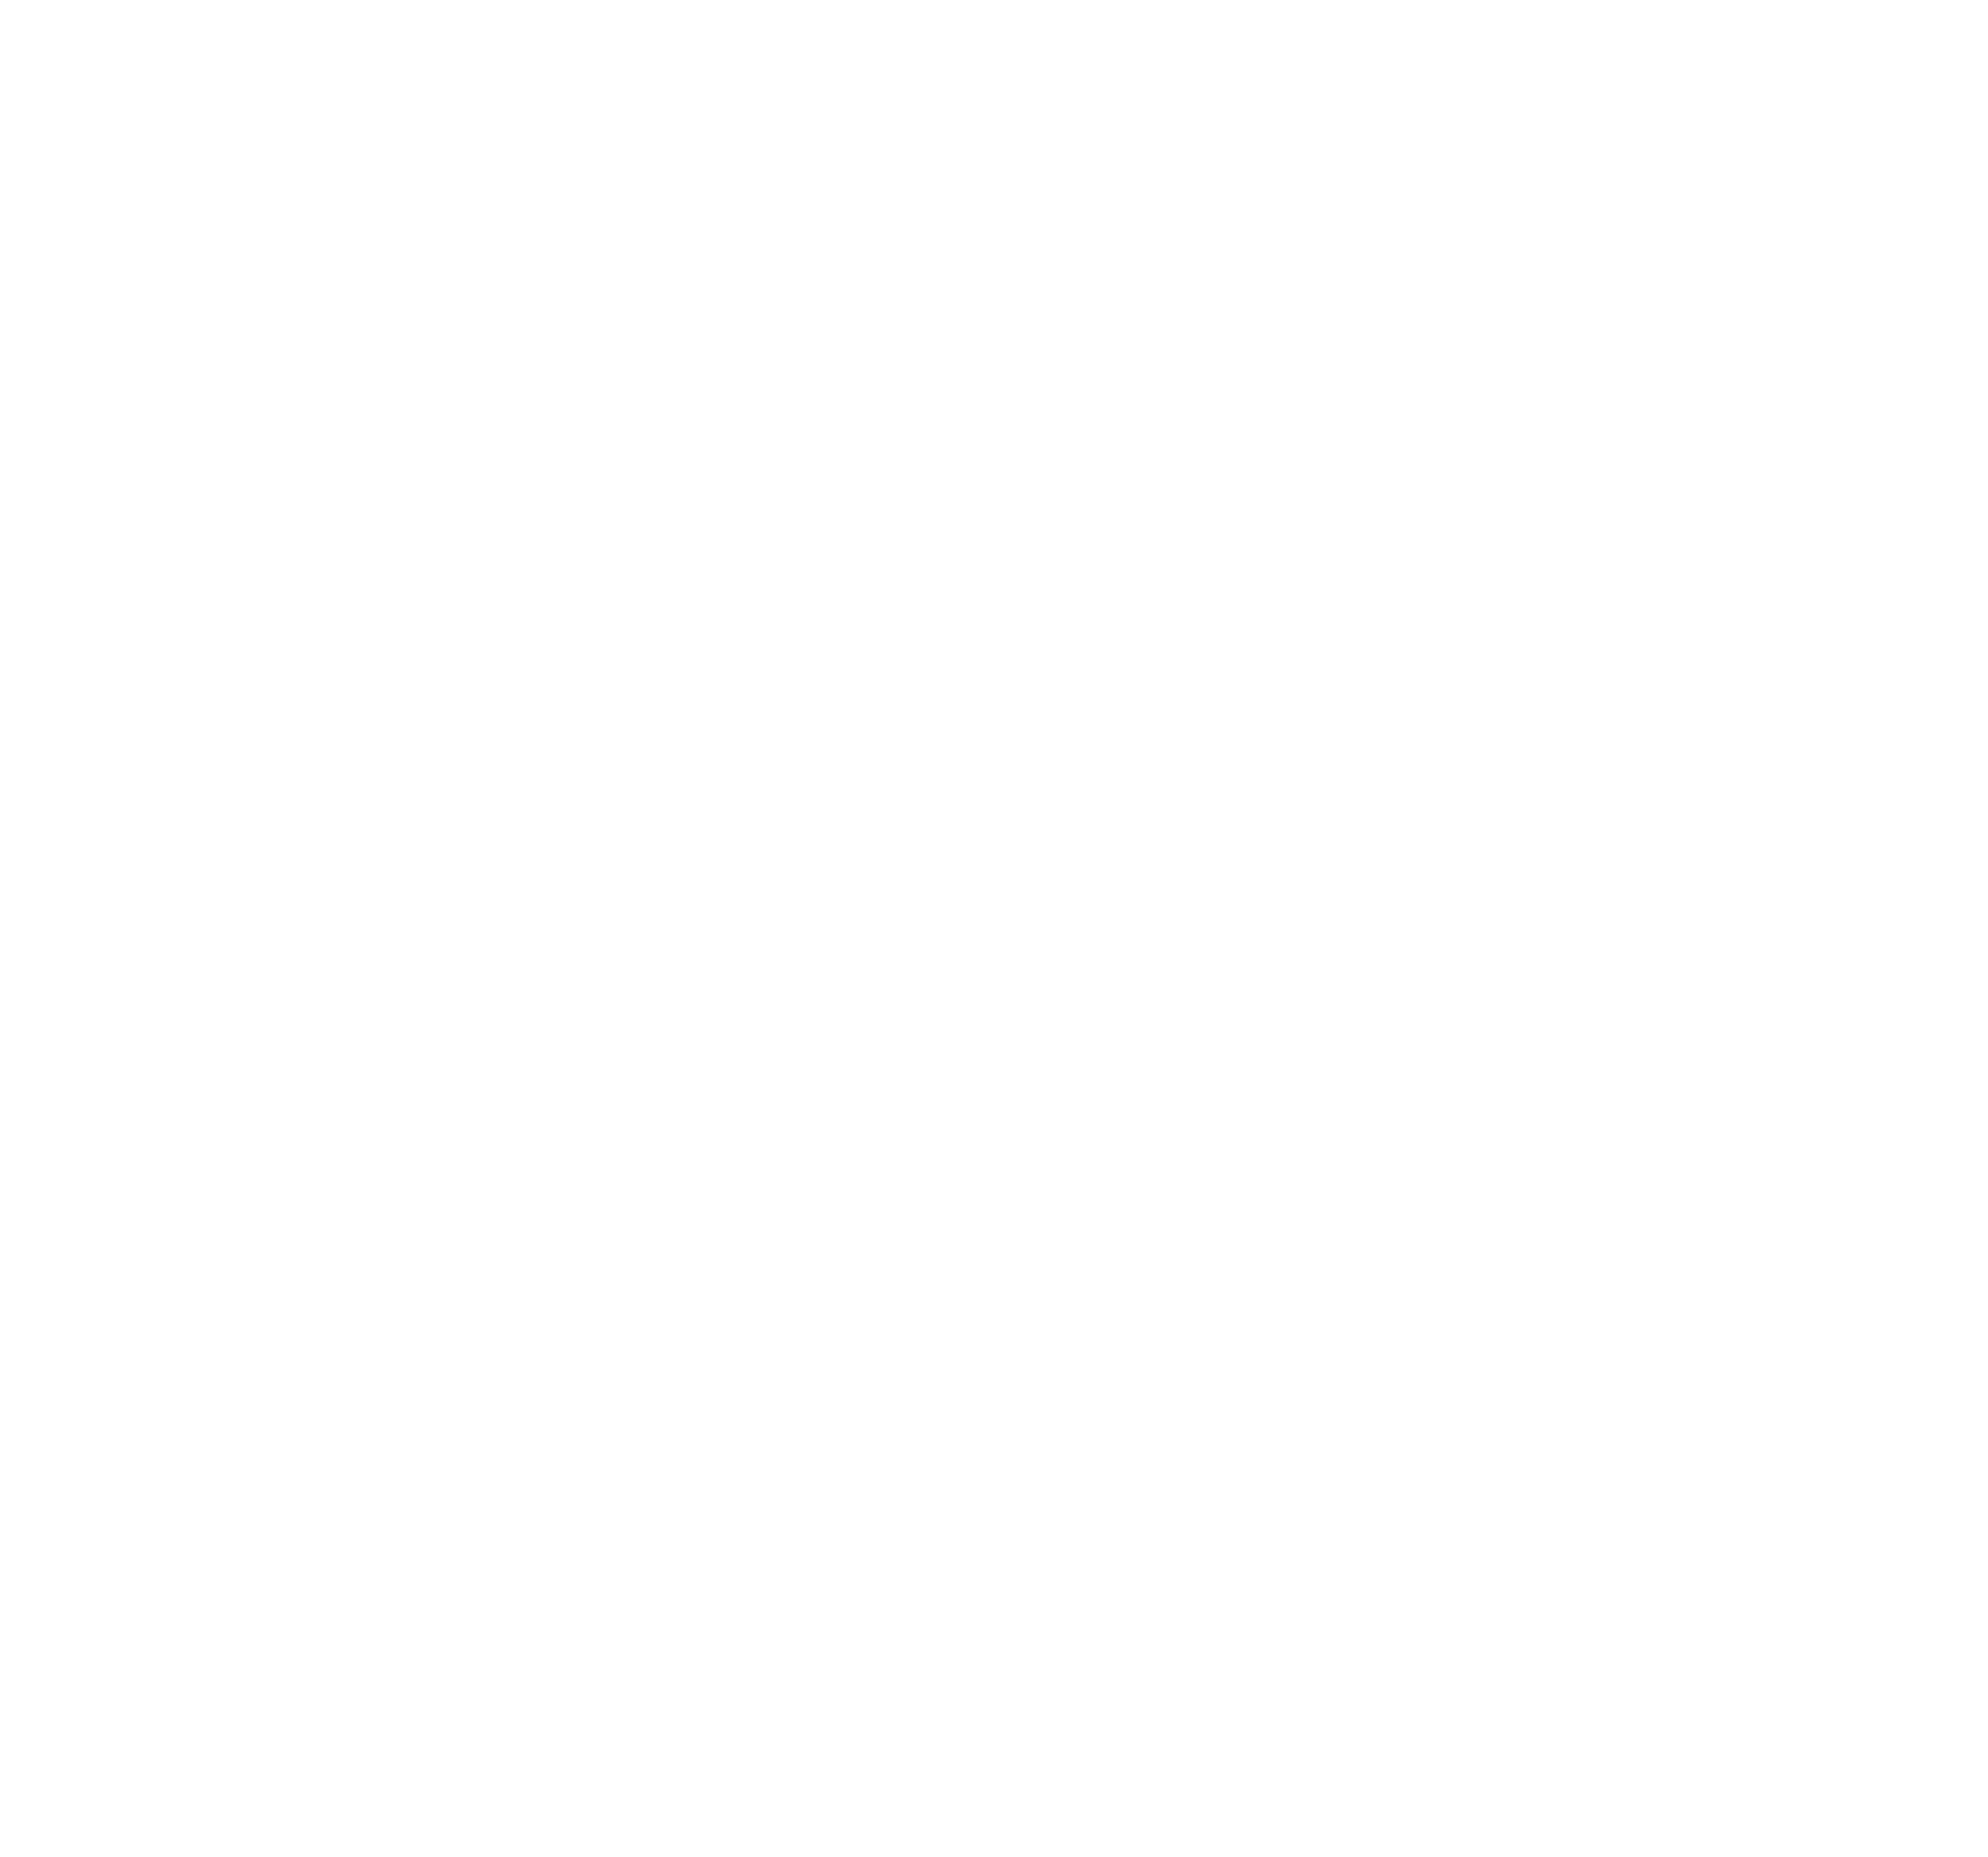 Wagner, Crawford, Gambill & Jungers | Attorneys at Law